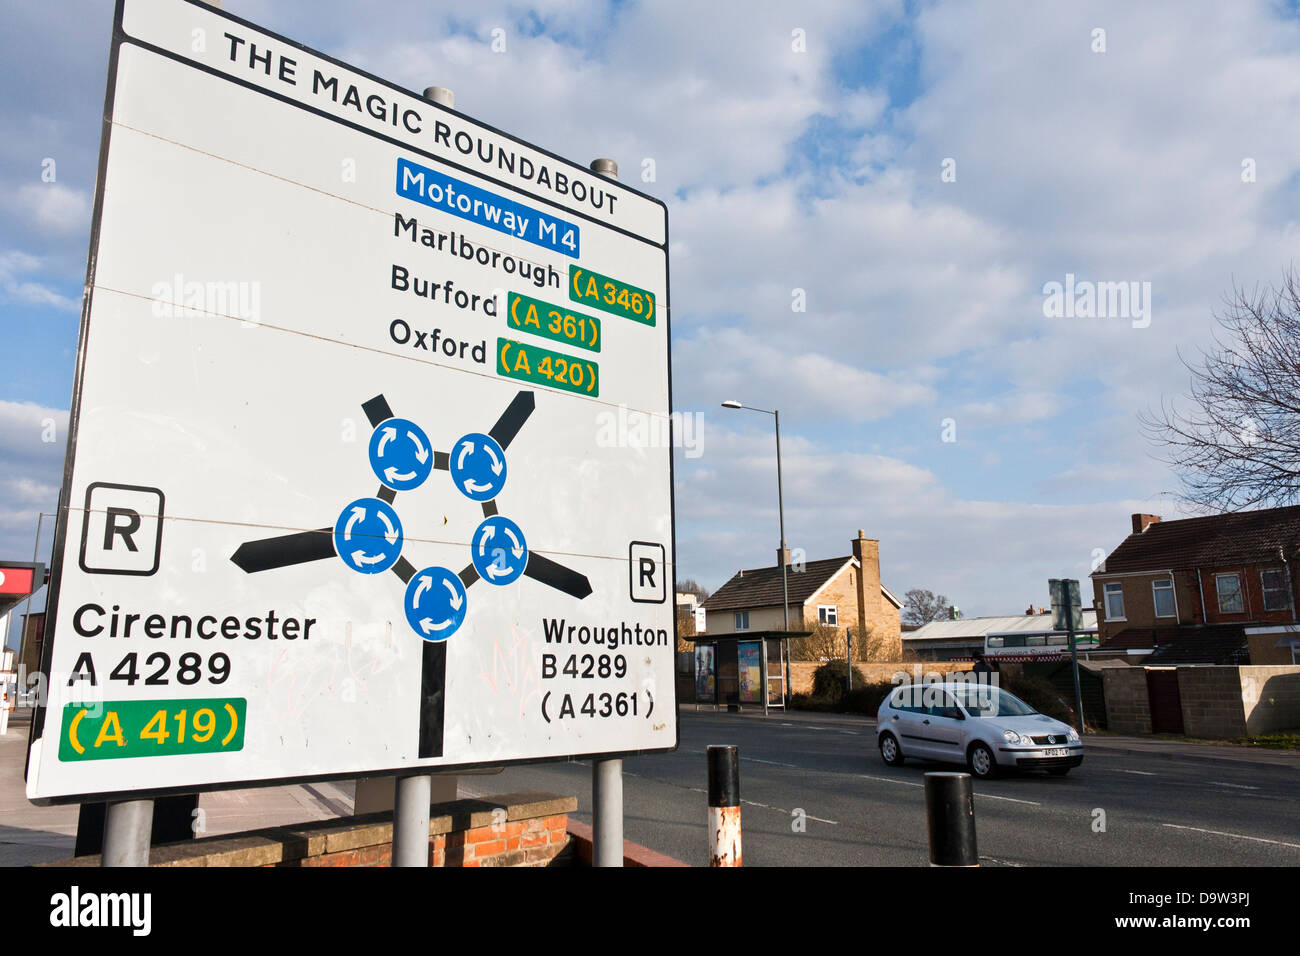 Access road to the five mini-roundabouts at the notorious Magic Roundabout in Swindon. Stock Photo